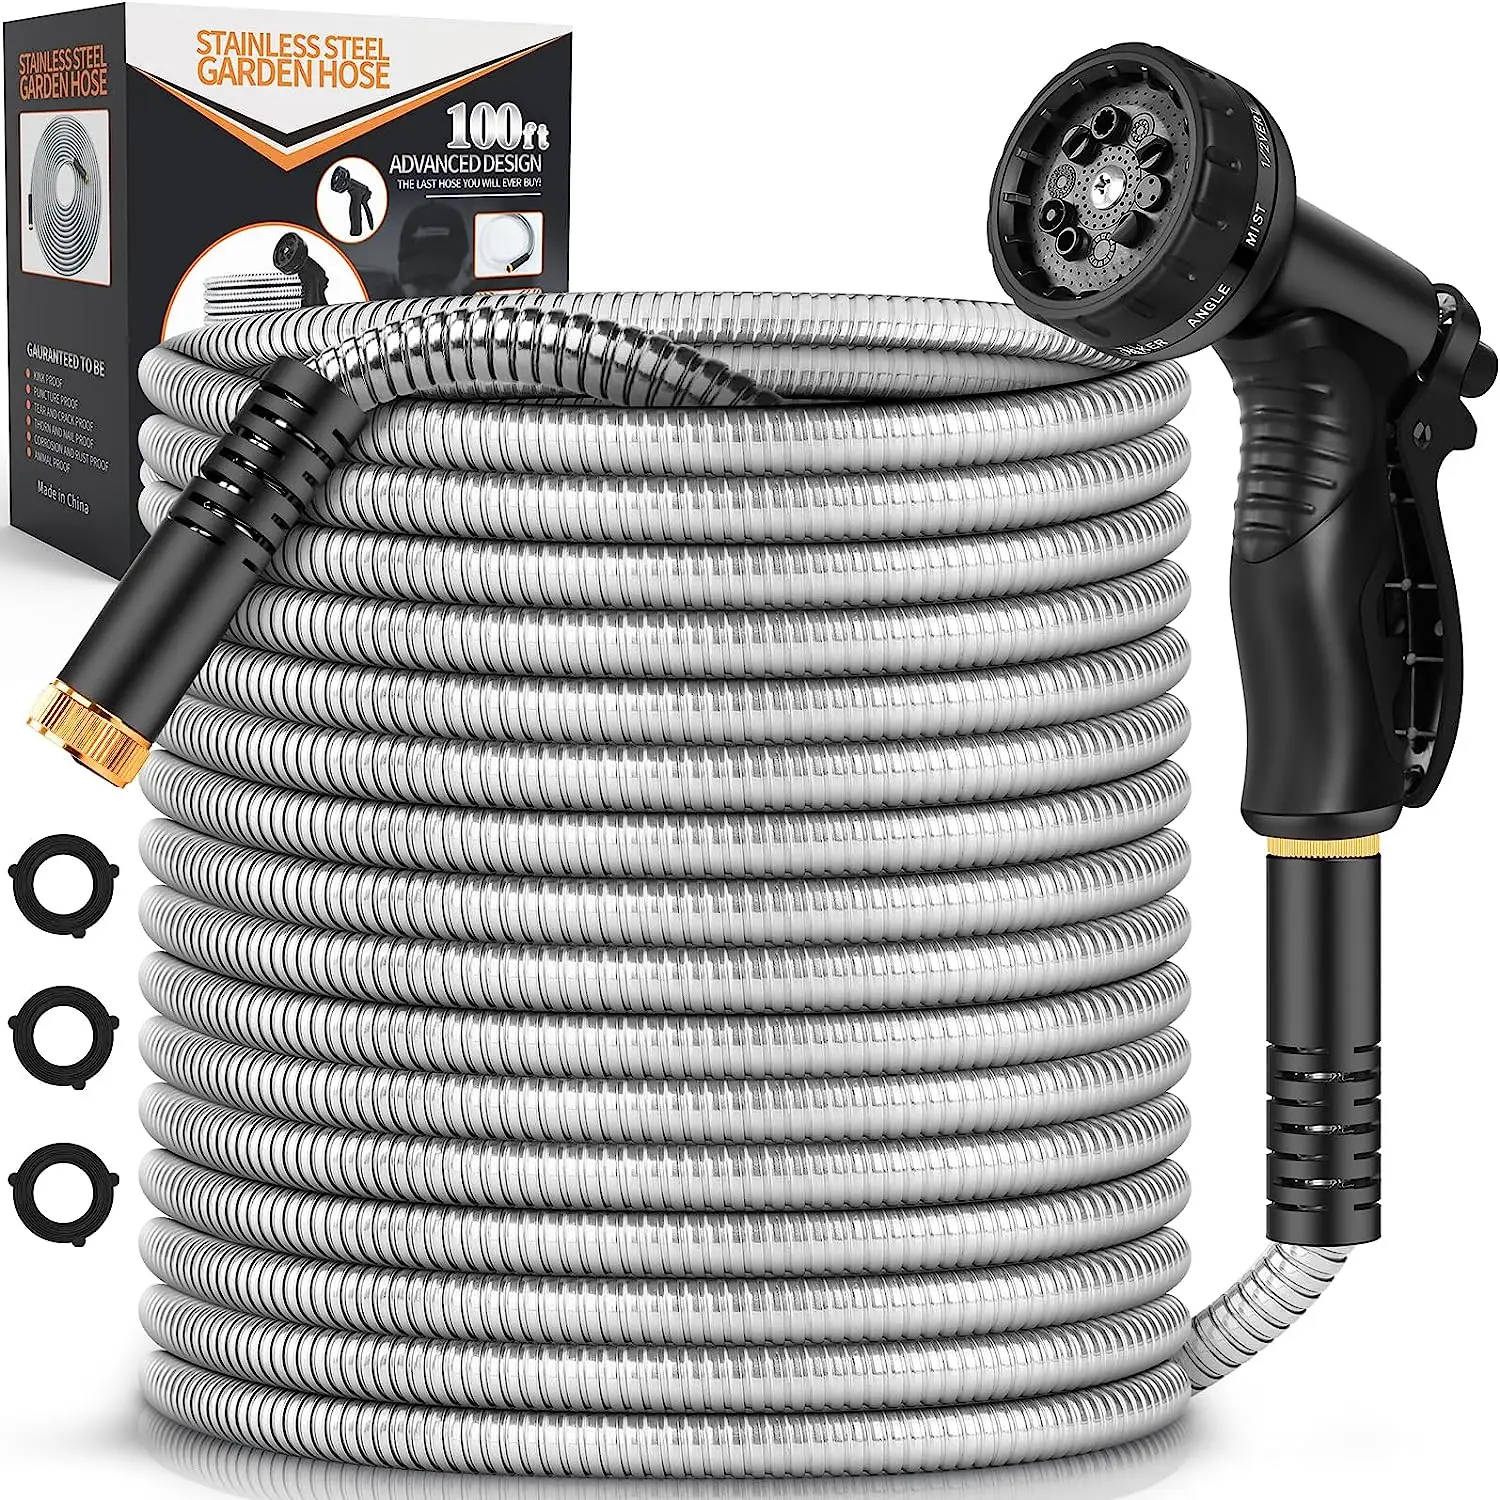 

POPTOP Metal Garden Hose 100FT, Heavy Duty Water Hose With 10 Nozzle, No- & No-Kink, Tough & Flexible, Durable and Lightweight